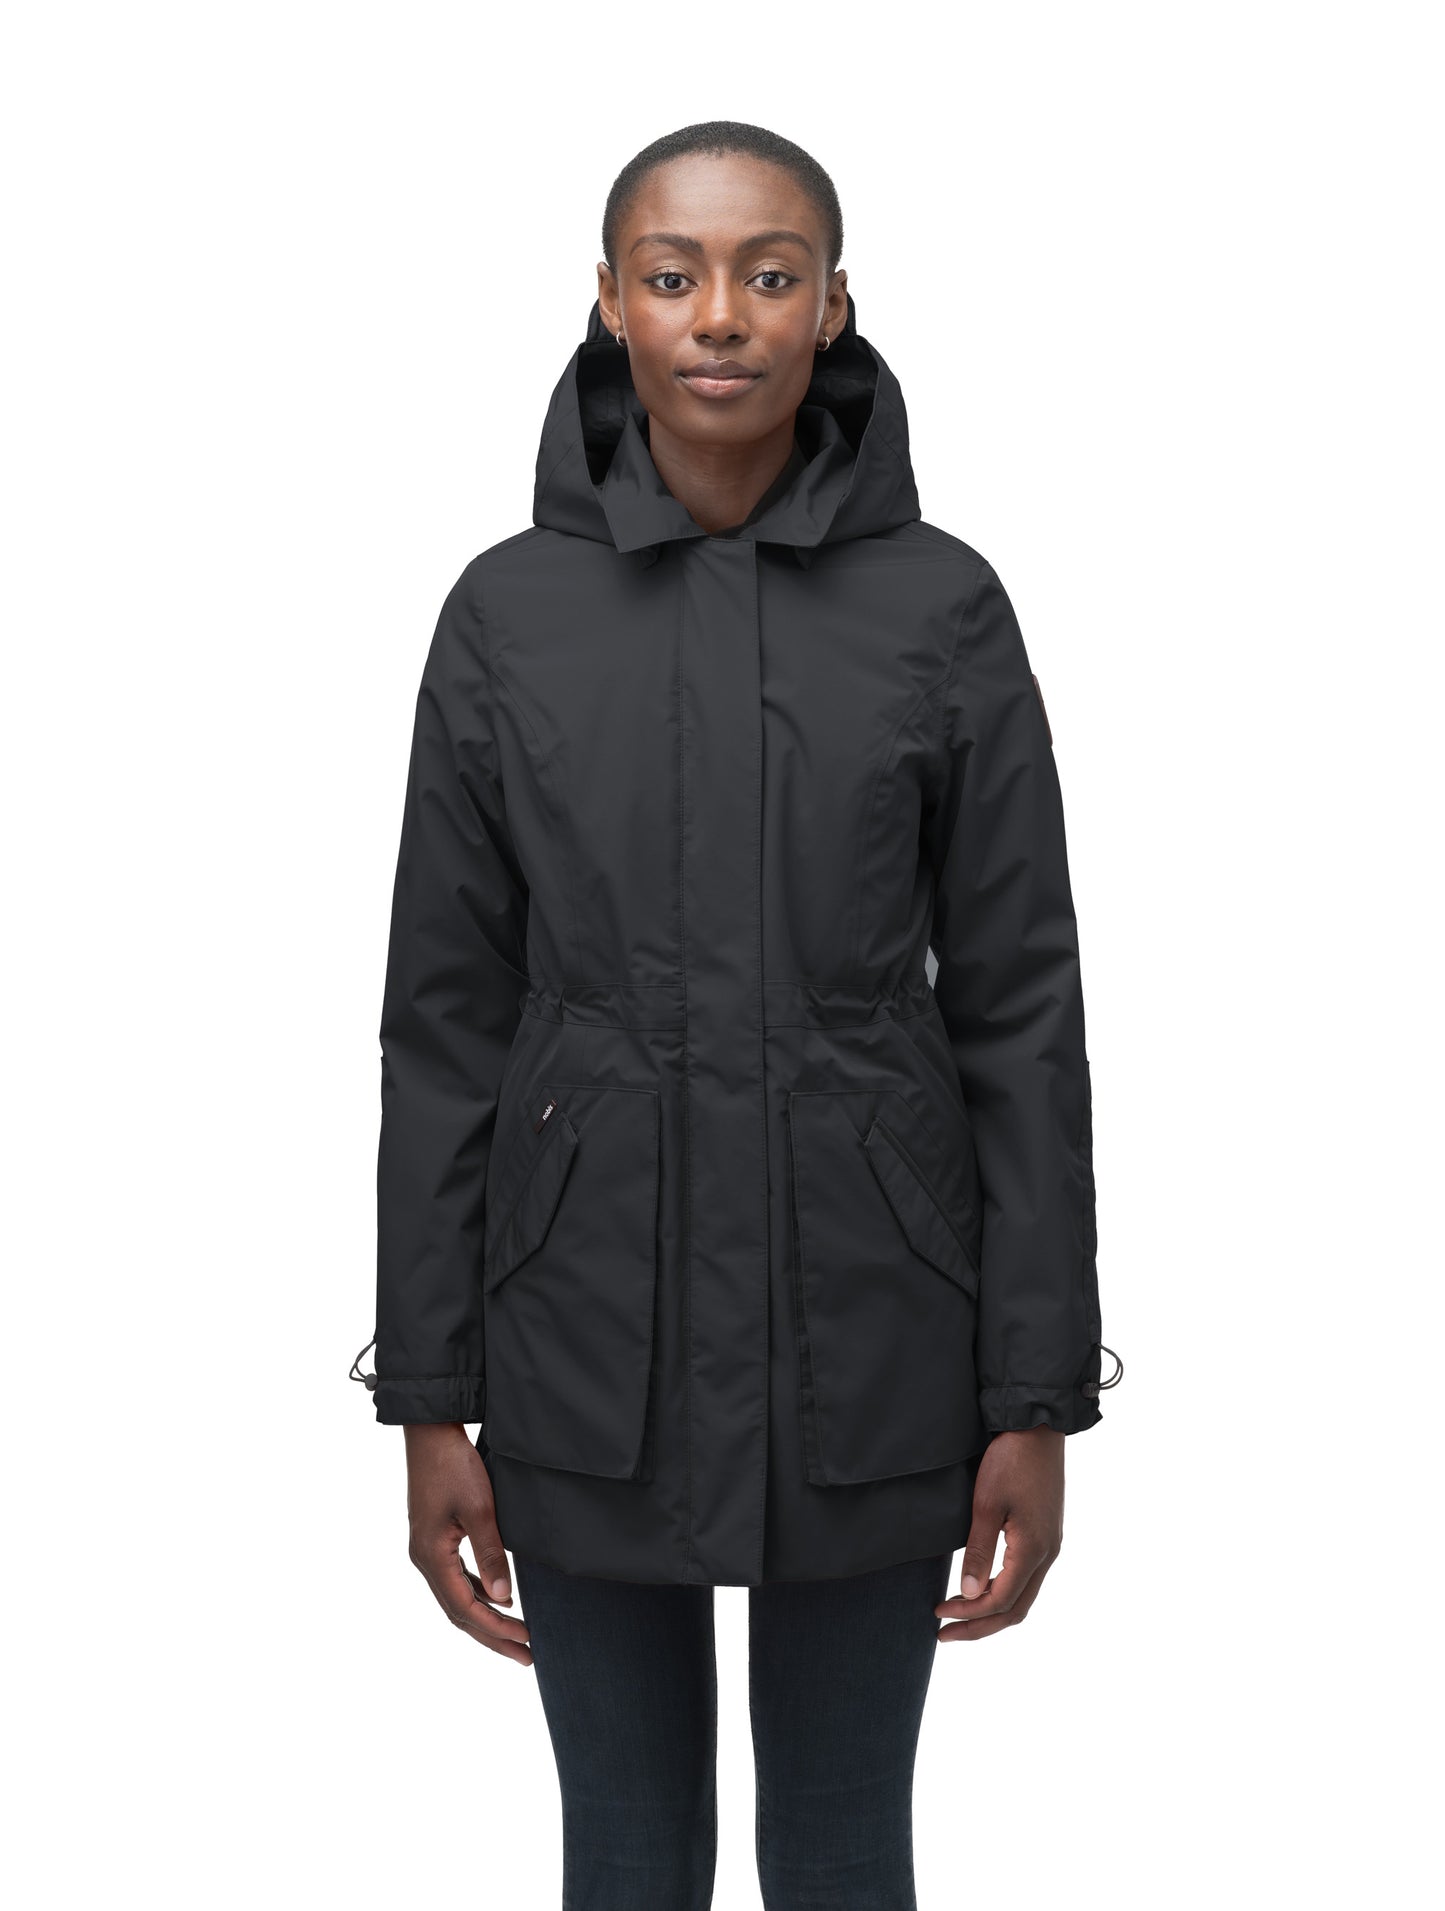 Women's thigh length raincoat with collar and non-removable hood in Black